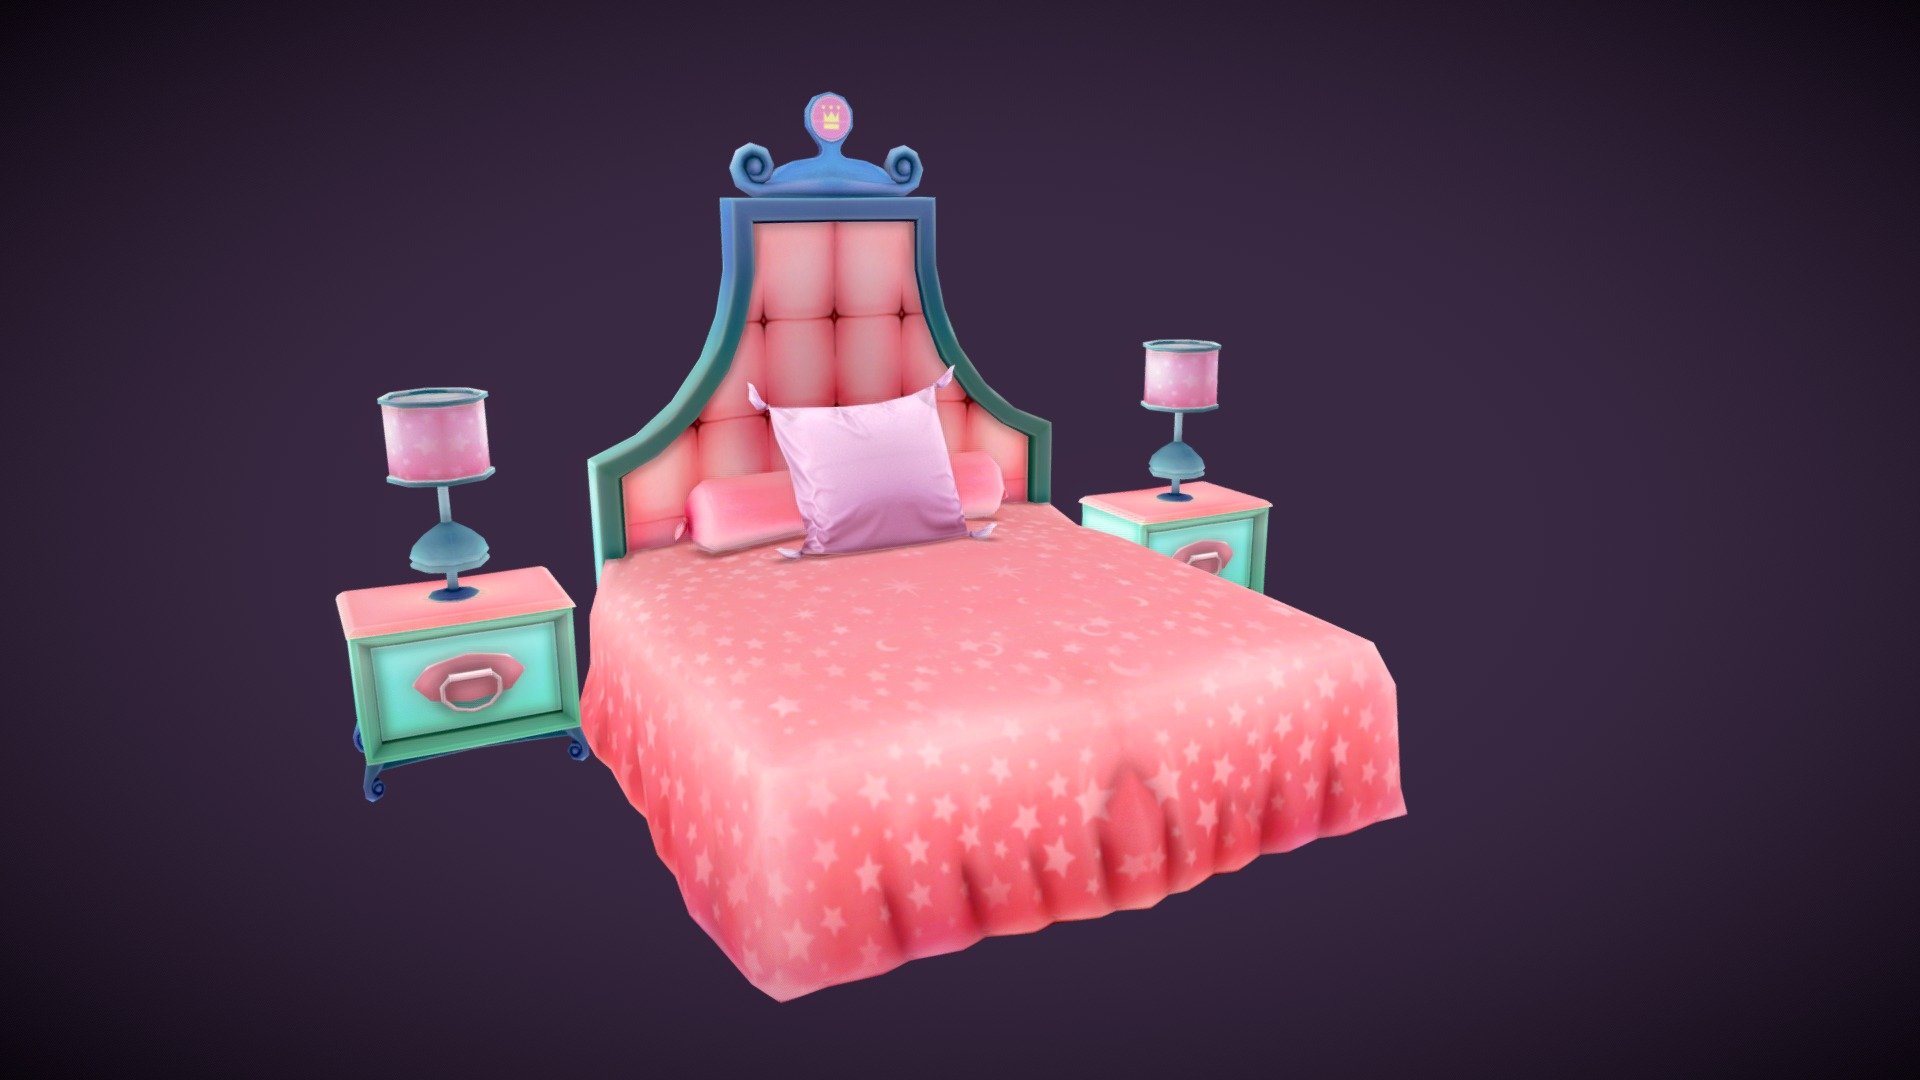 After receiving some feedback, I've updated the stylised bed model 3d model